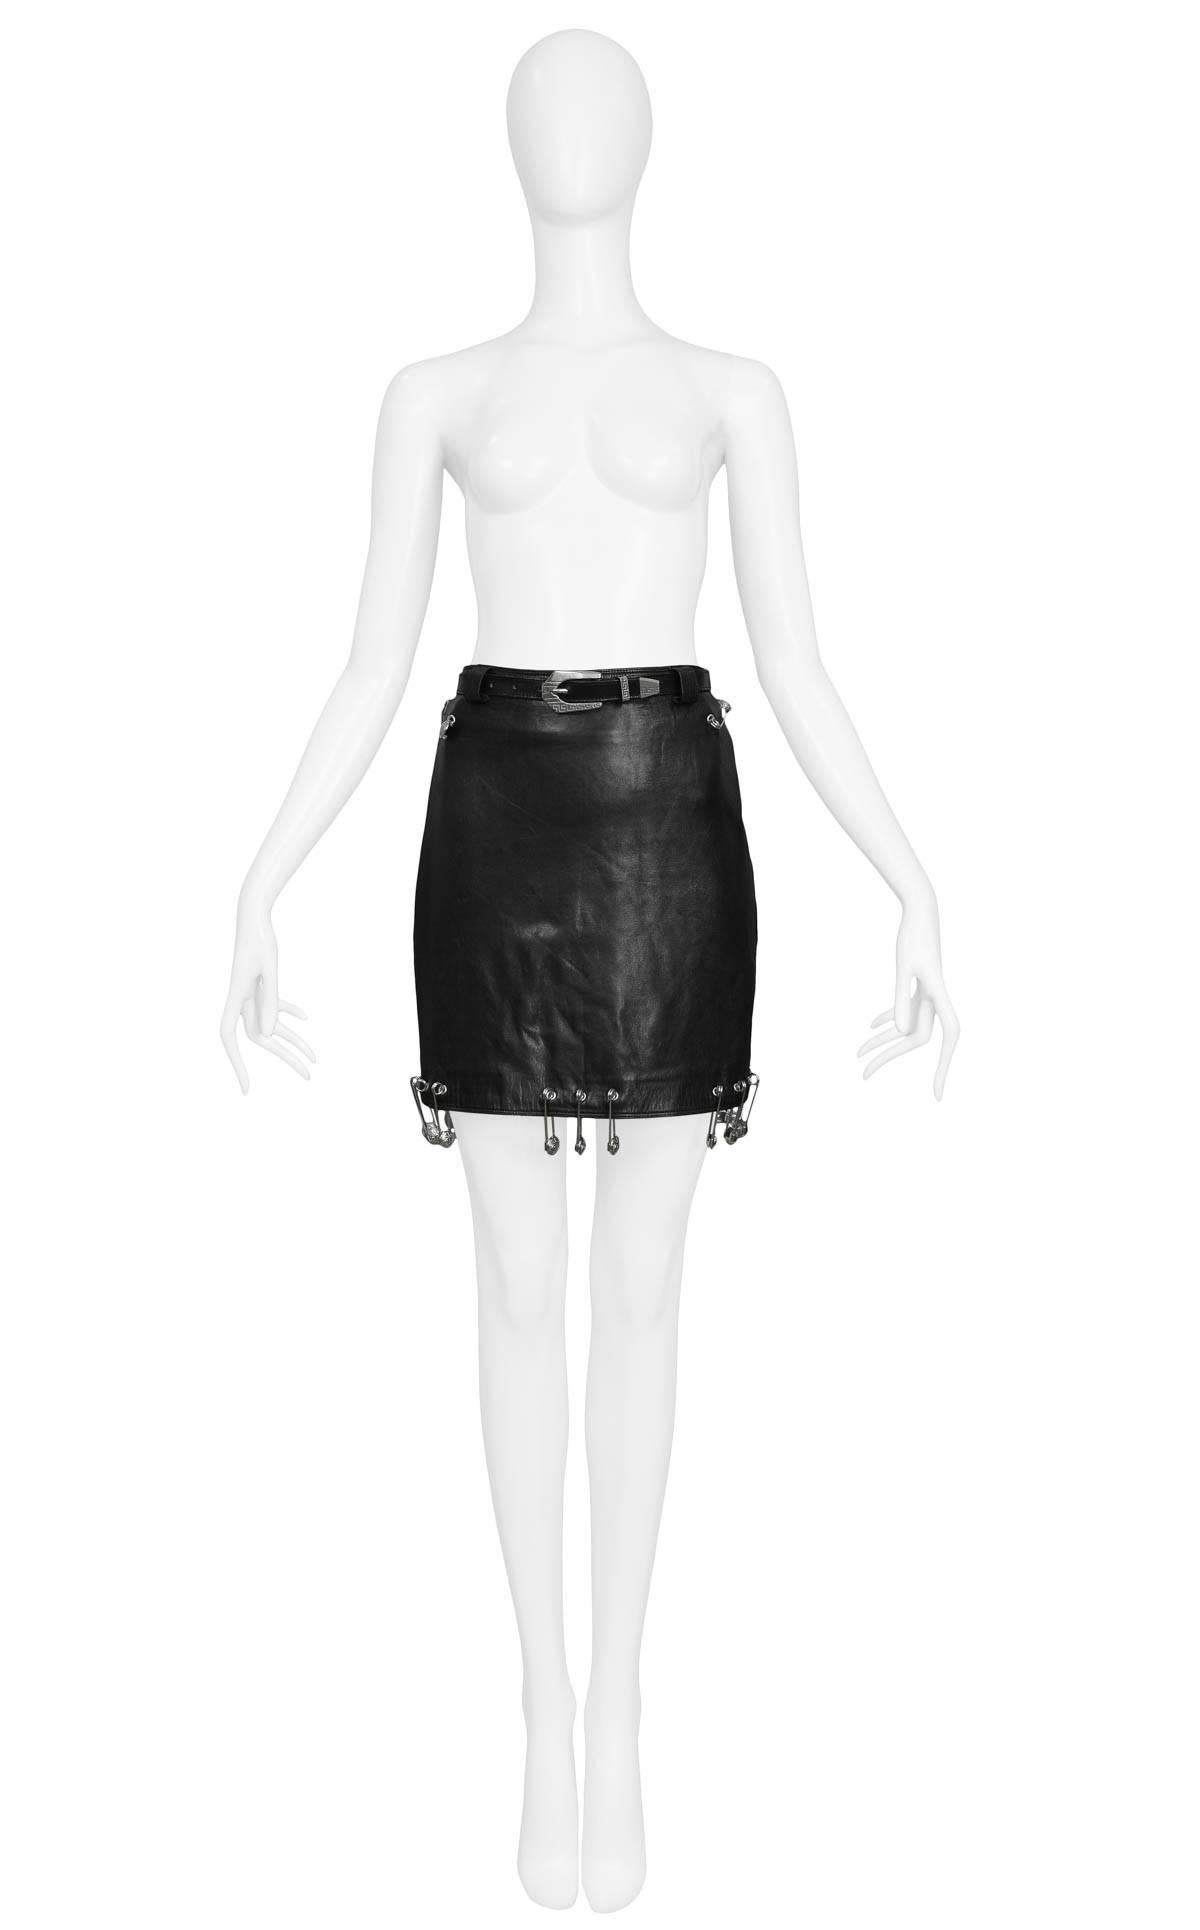 Iconic vintage Gianni Versace black leather skirt adorned with safety pins at hem & hips. Original silver-tone buckle belt with etched logo included with skirt. From the Spring/Summer 1994 Collection. 

